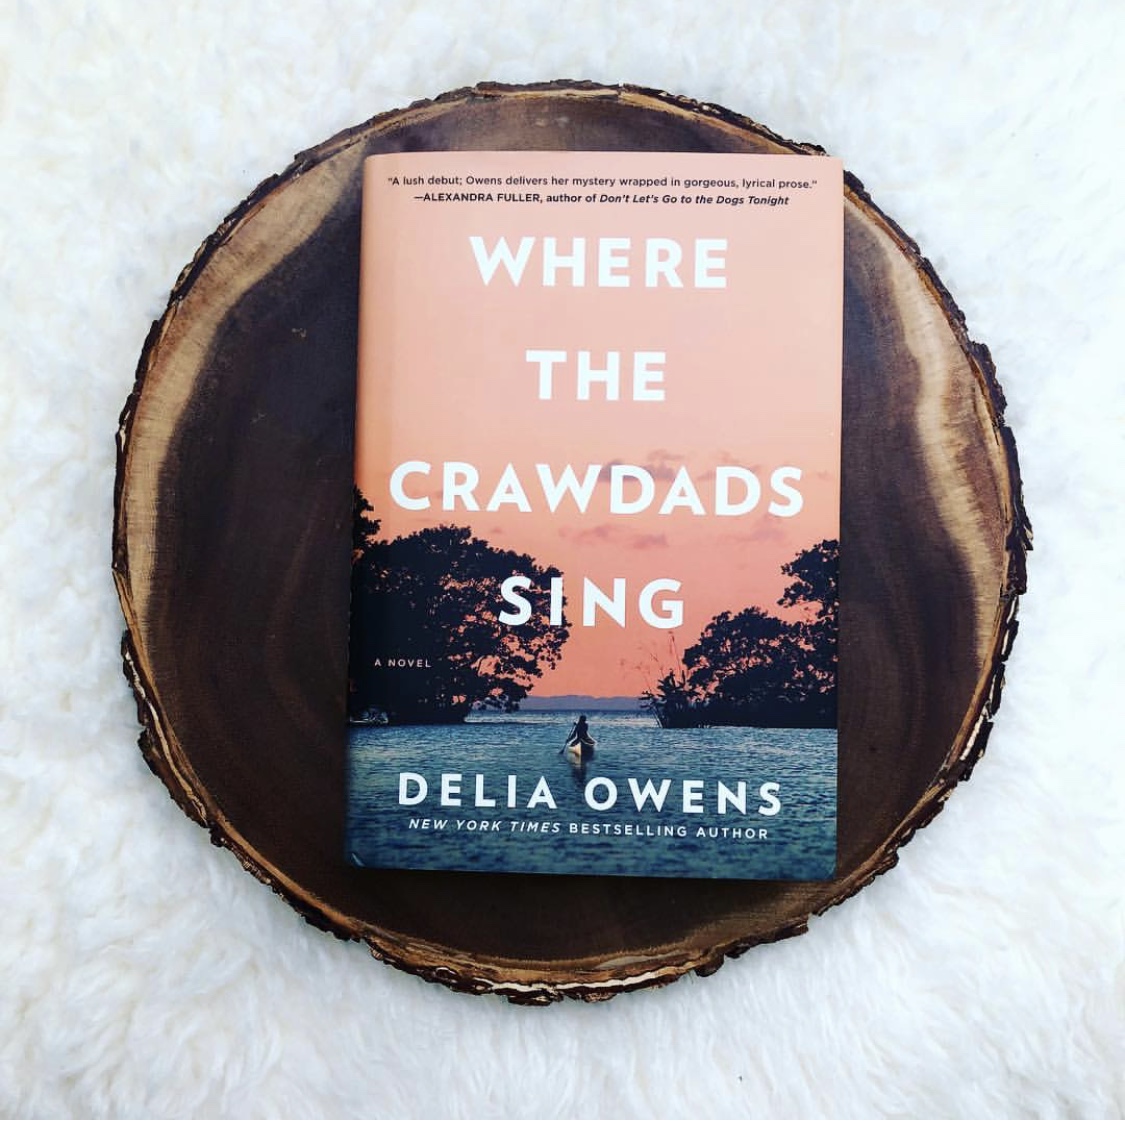 How to host a book club for where the crawdads sing